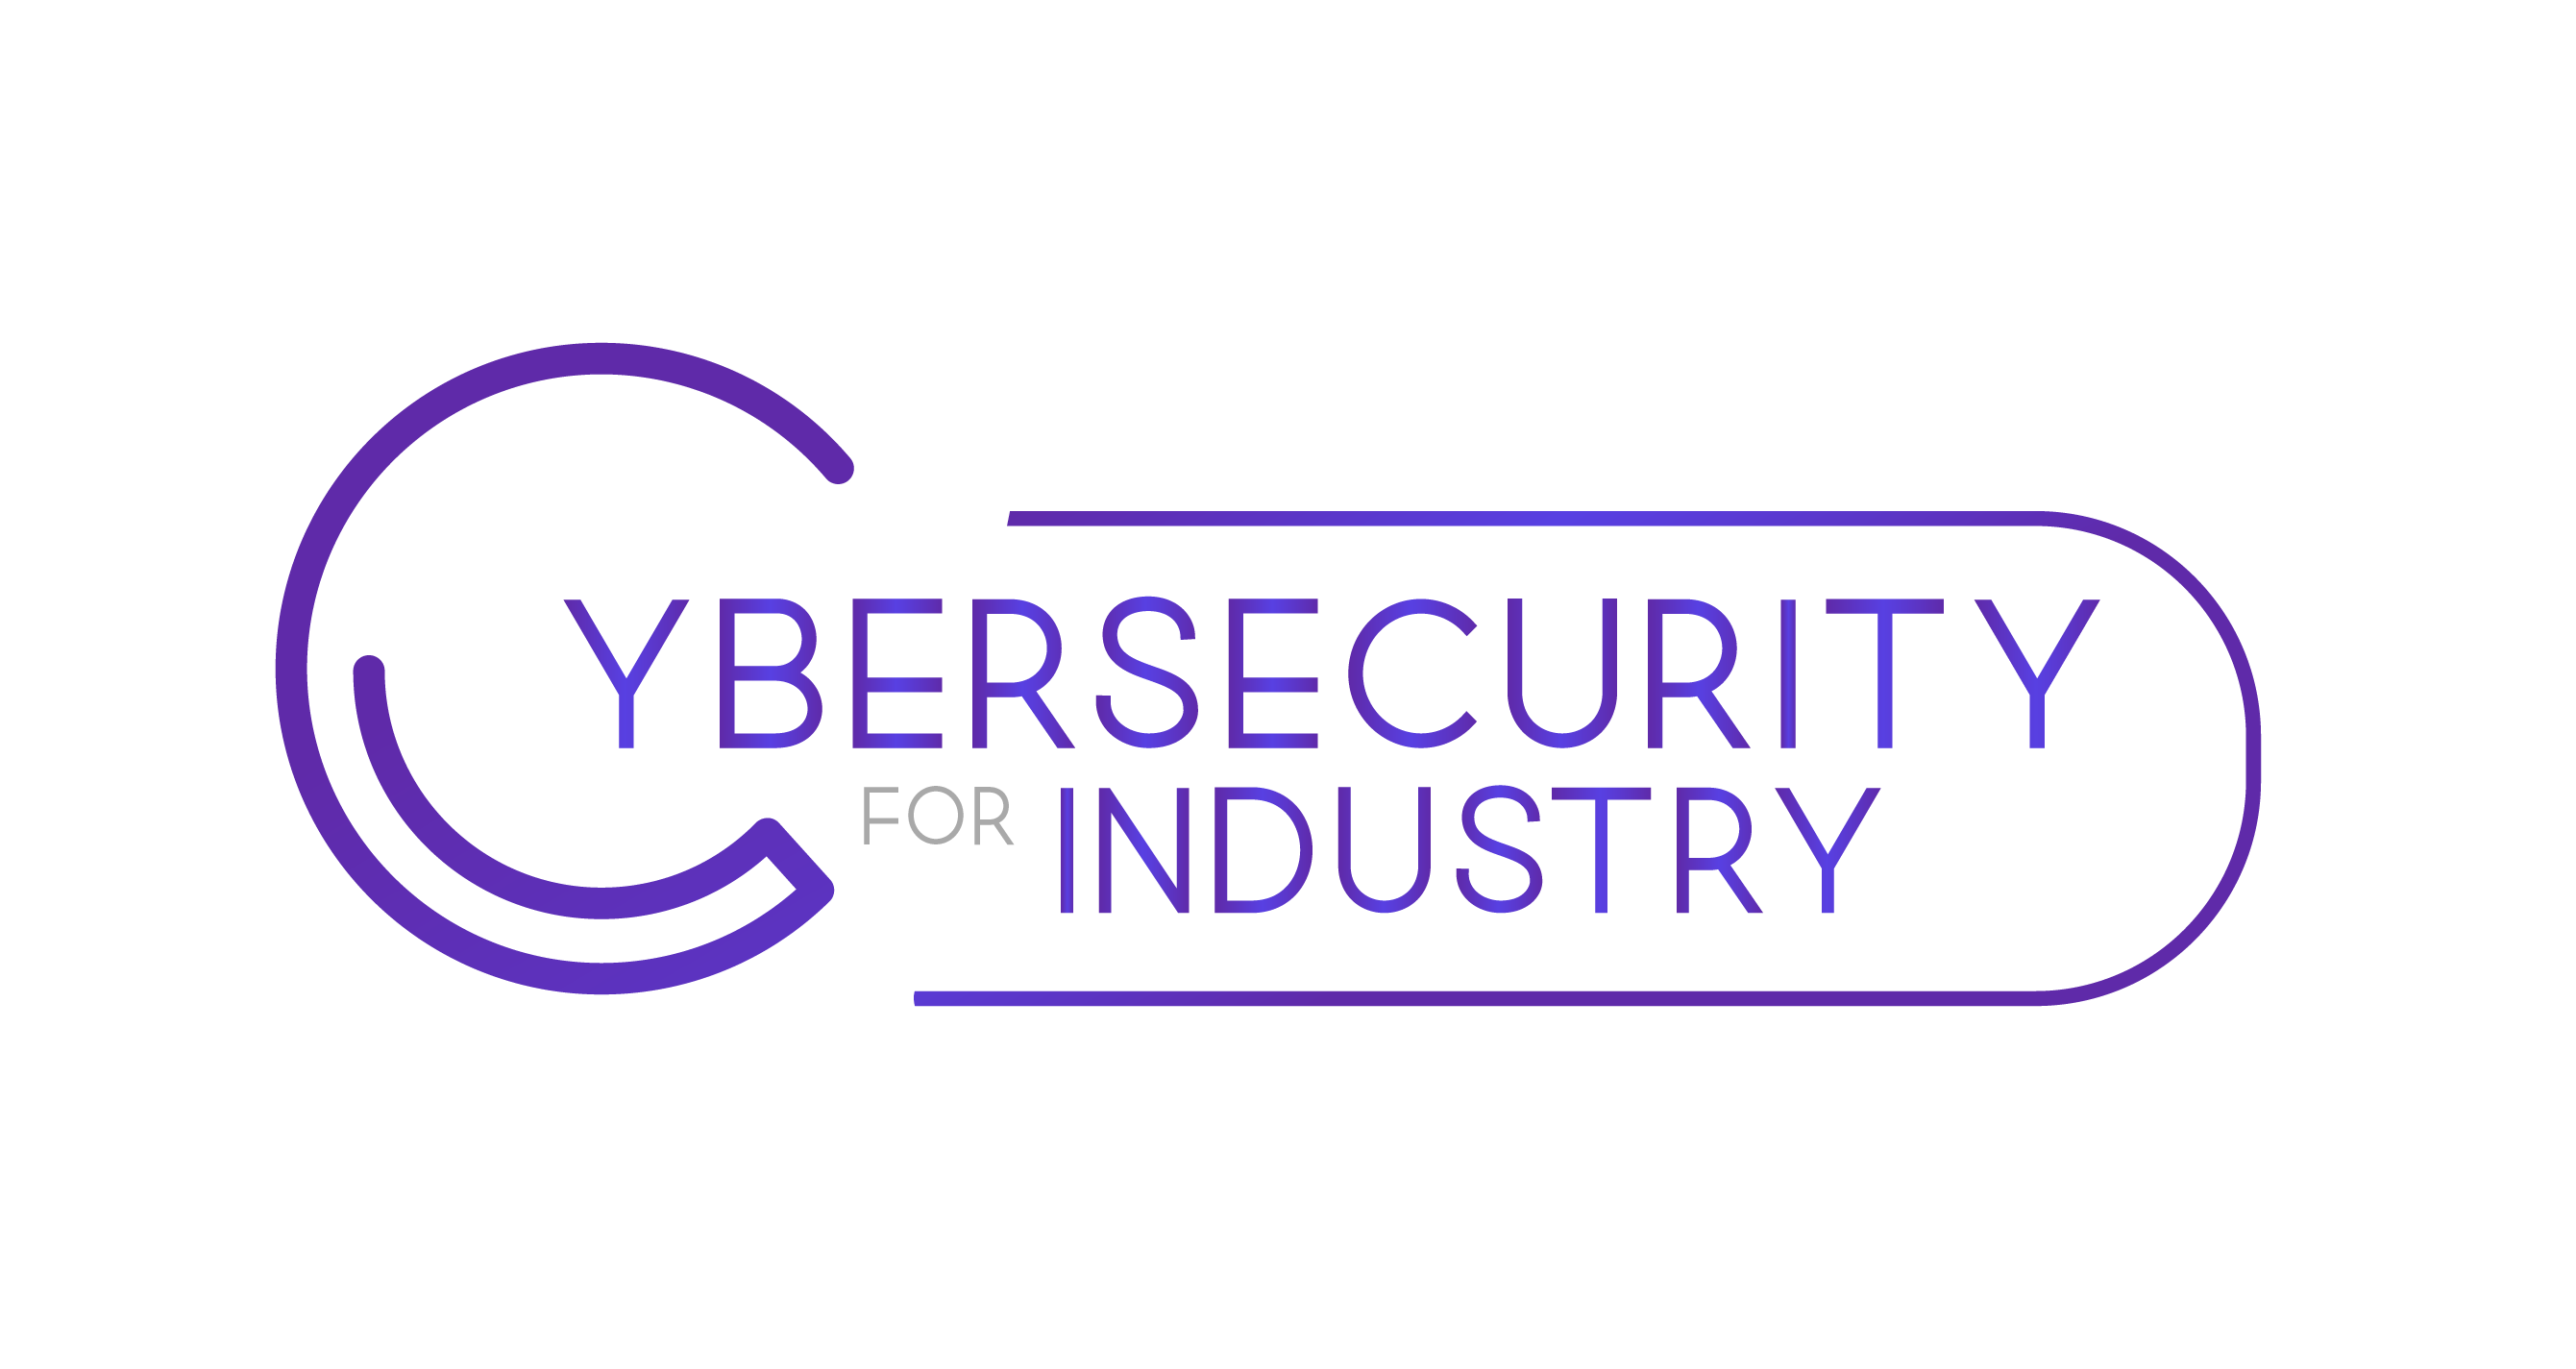 cybersecurity for industry